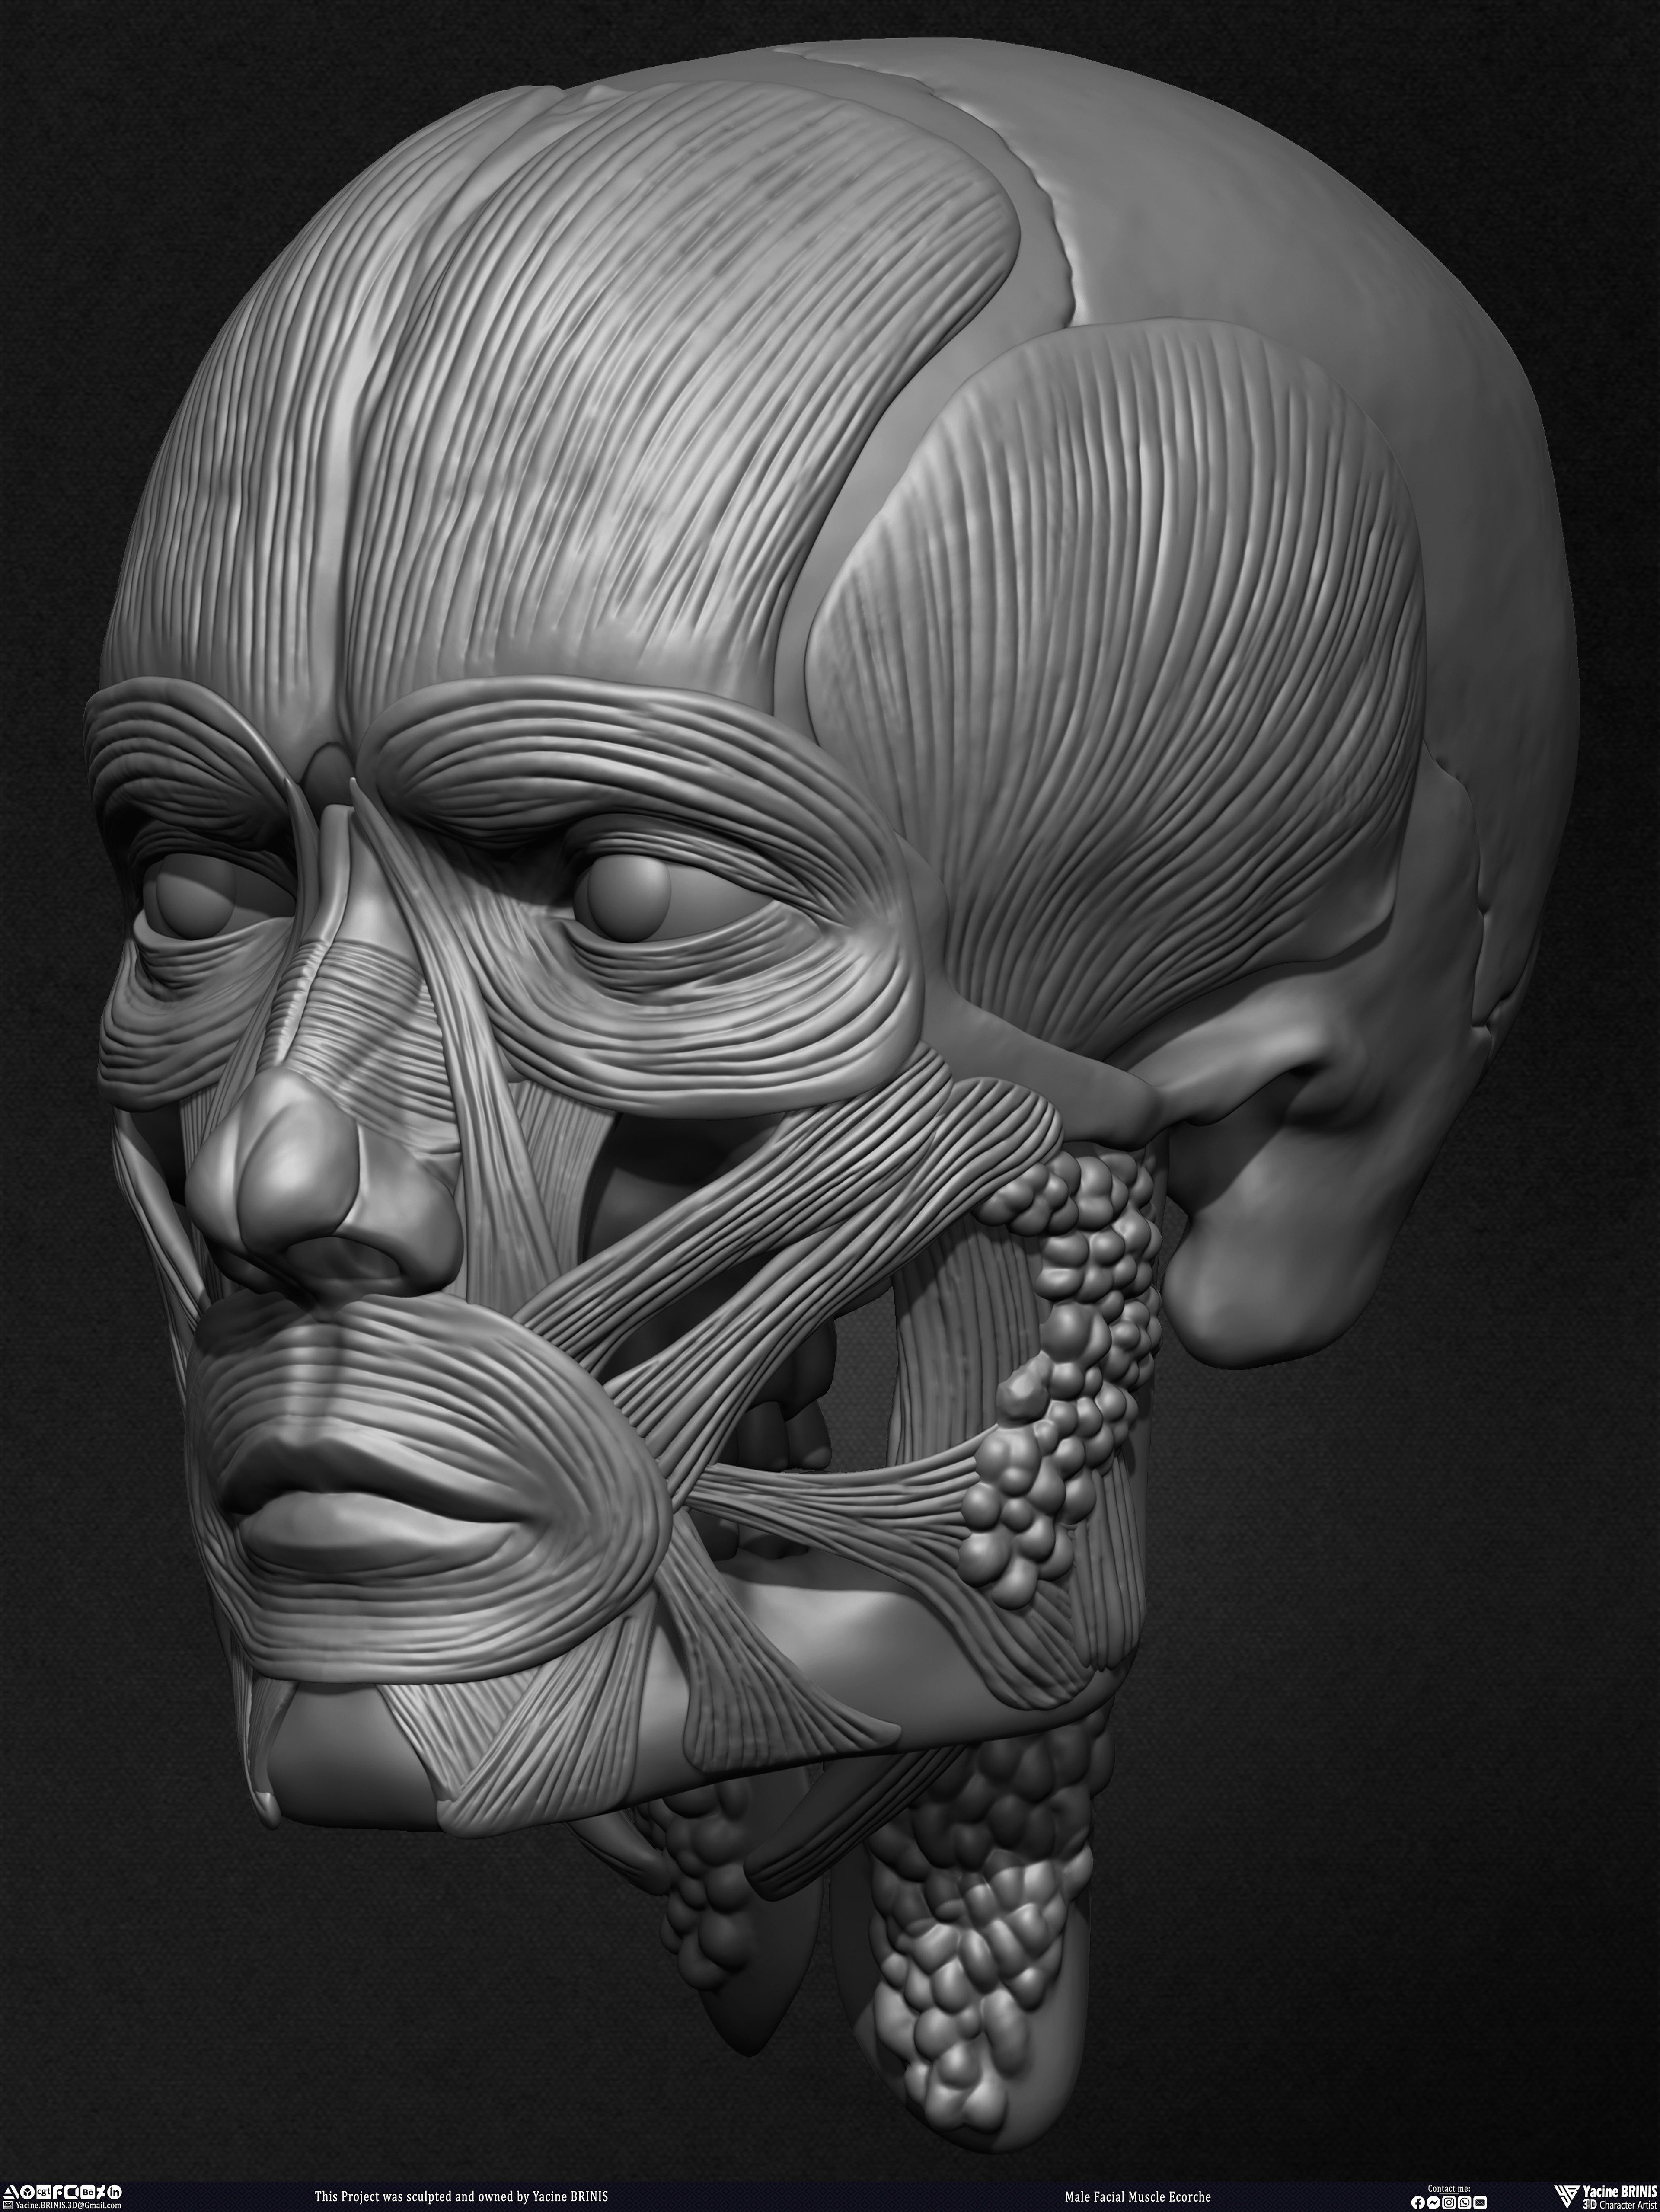 Male Facial Ecorche Human Anatomy sculpted by Yacine BRINIS 010